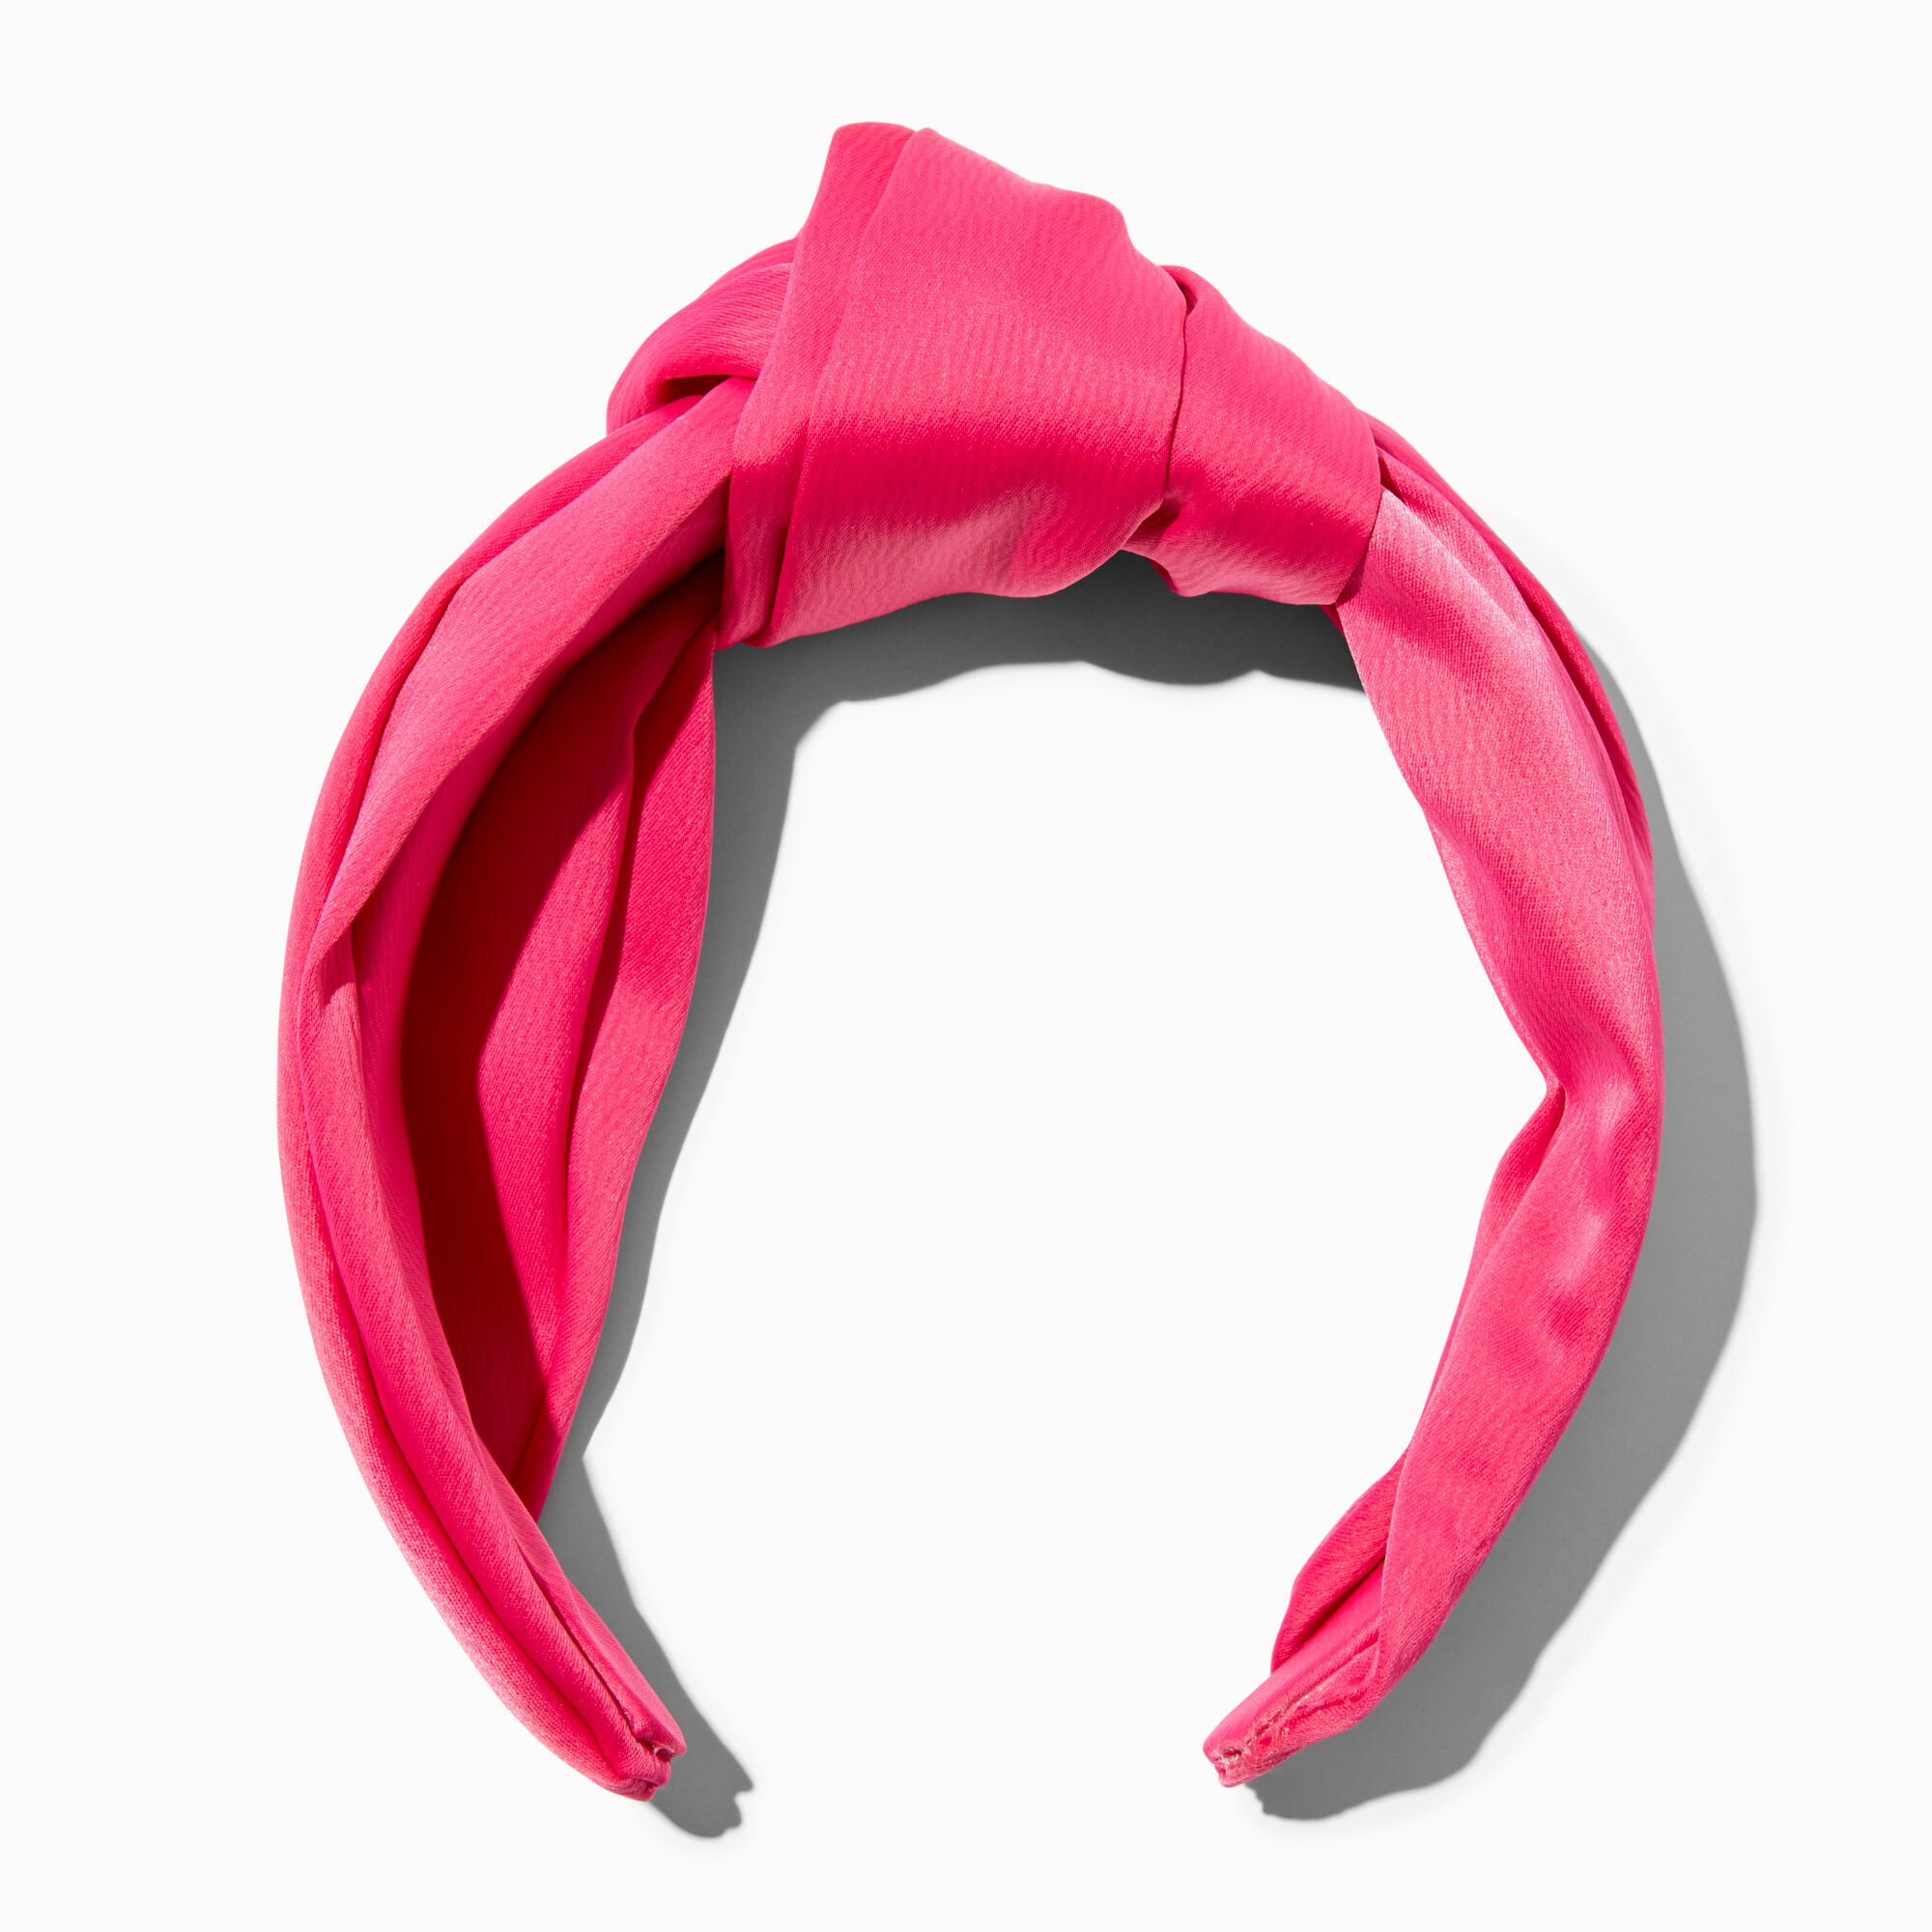 View Claires Hot Silky Knotted Headband Pink information